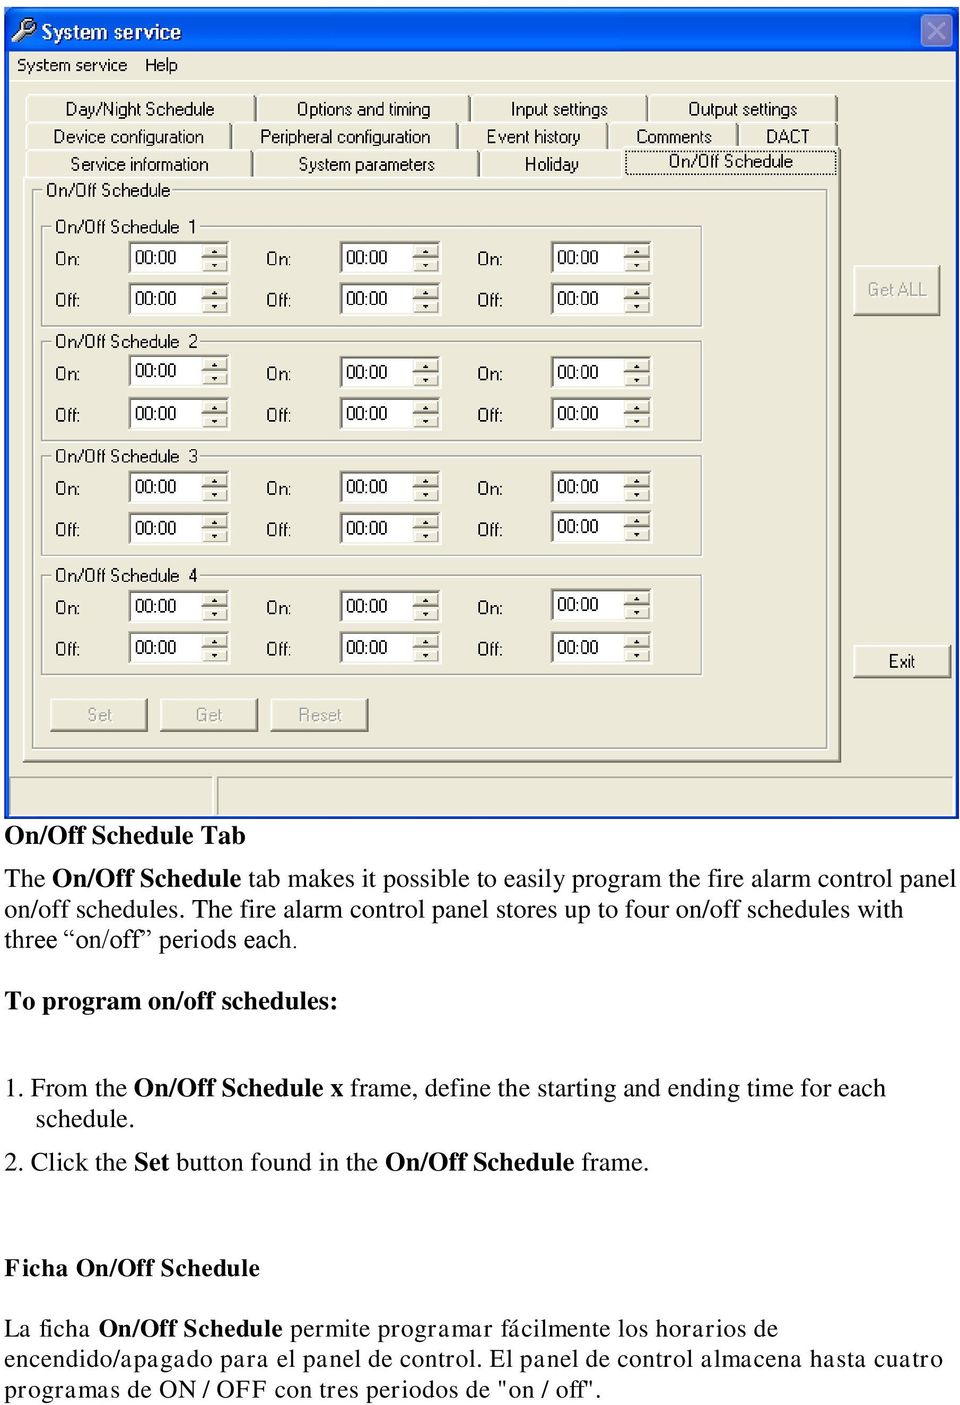 From the On/Off Schedule x frame, define the starting and ending time for each schedule. 2. Click the Set button found in the On/Off Schedule frame.